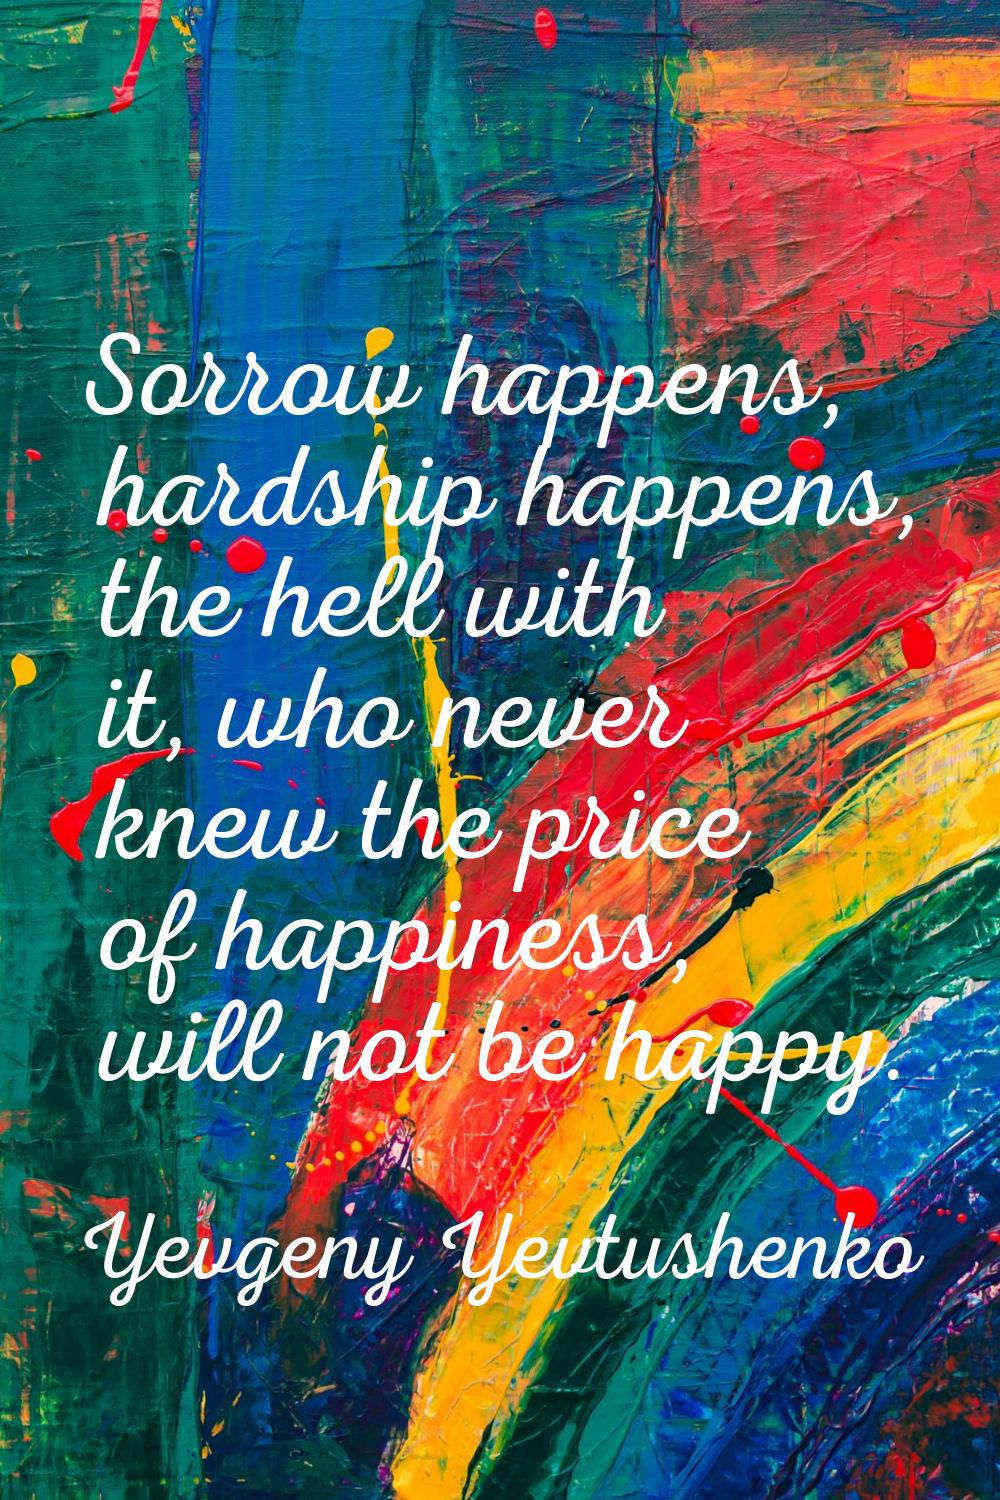 Sorrow happens, hardship happens, the hell with it, who never knew the price of happiness, will not